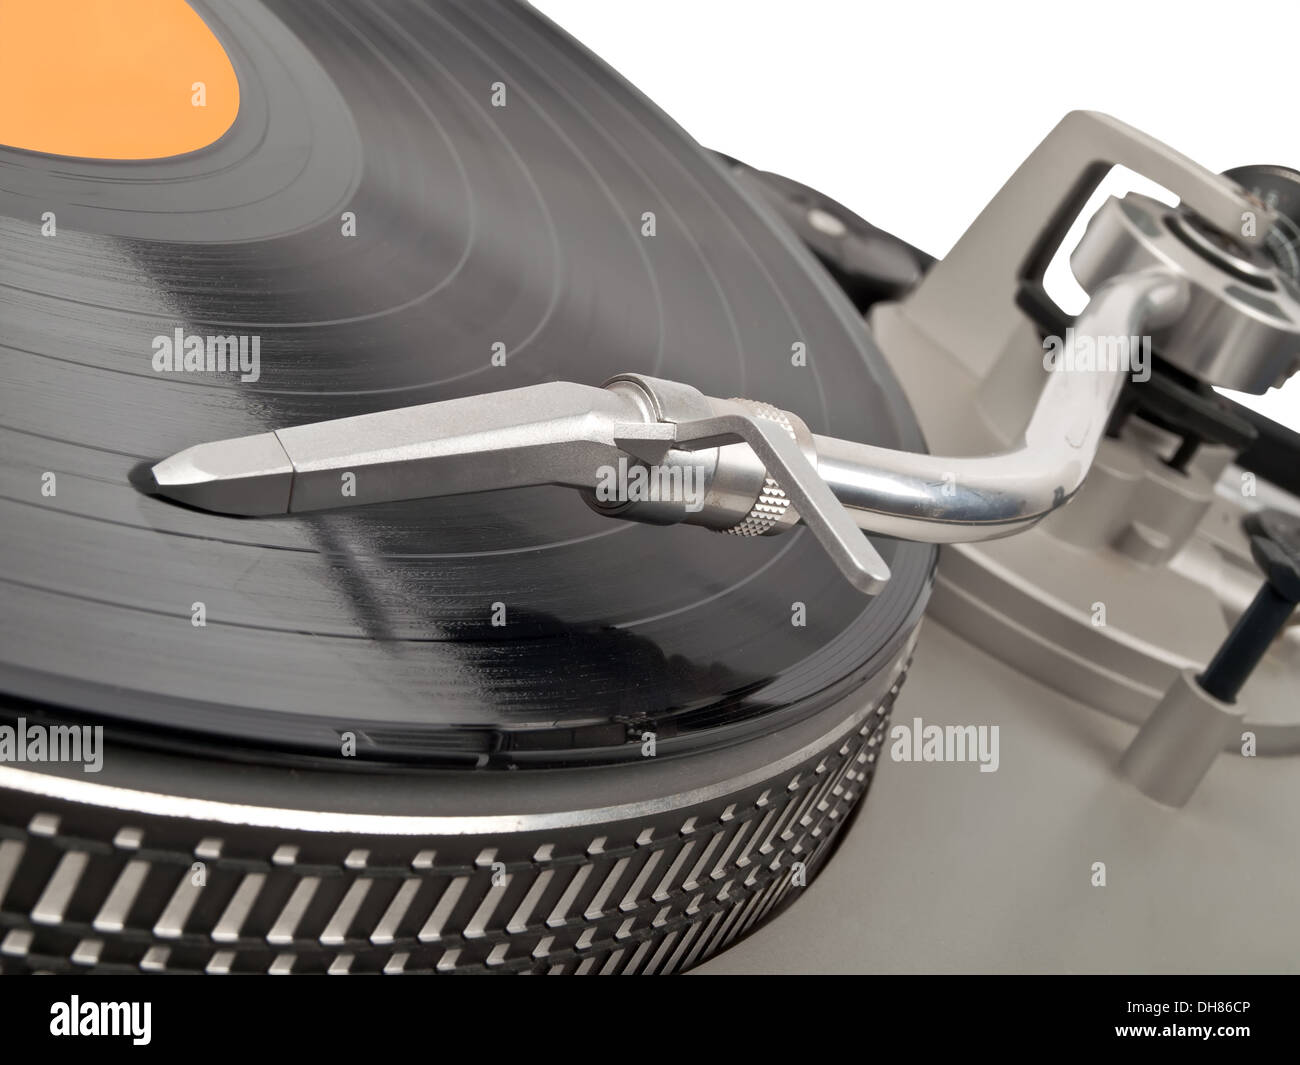 direct drive turntable, record and handle with cartridge Stock Photo